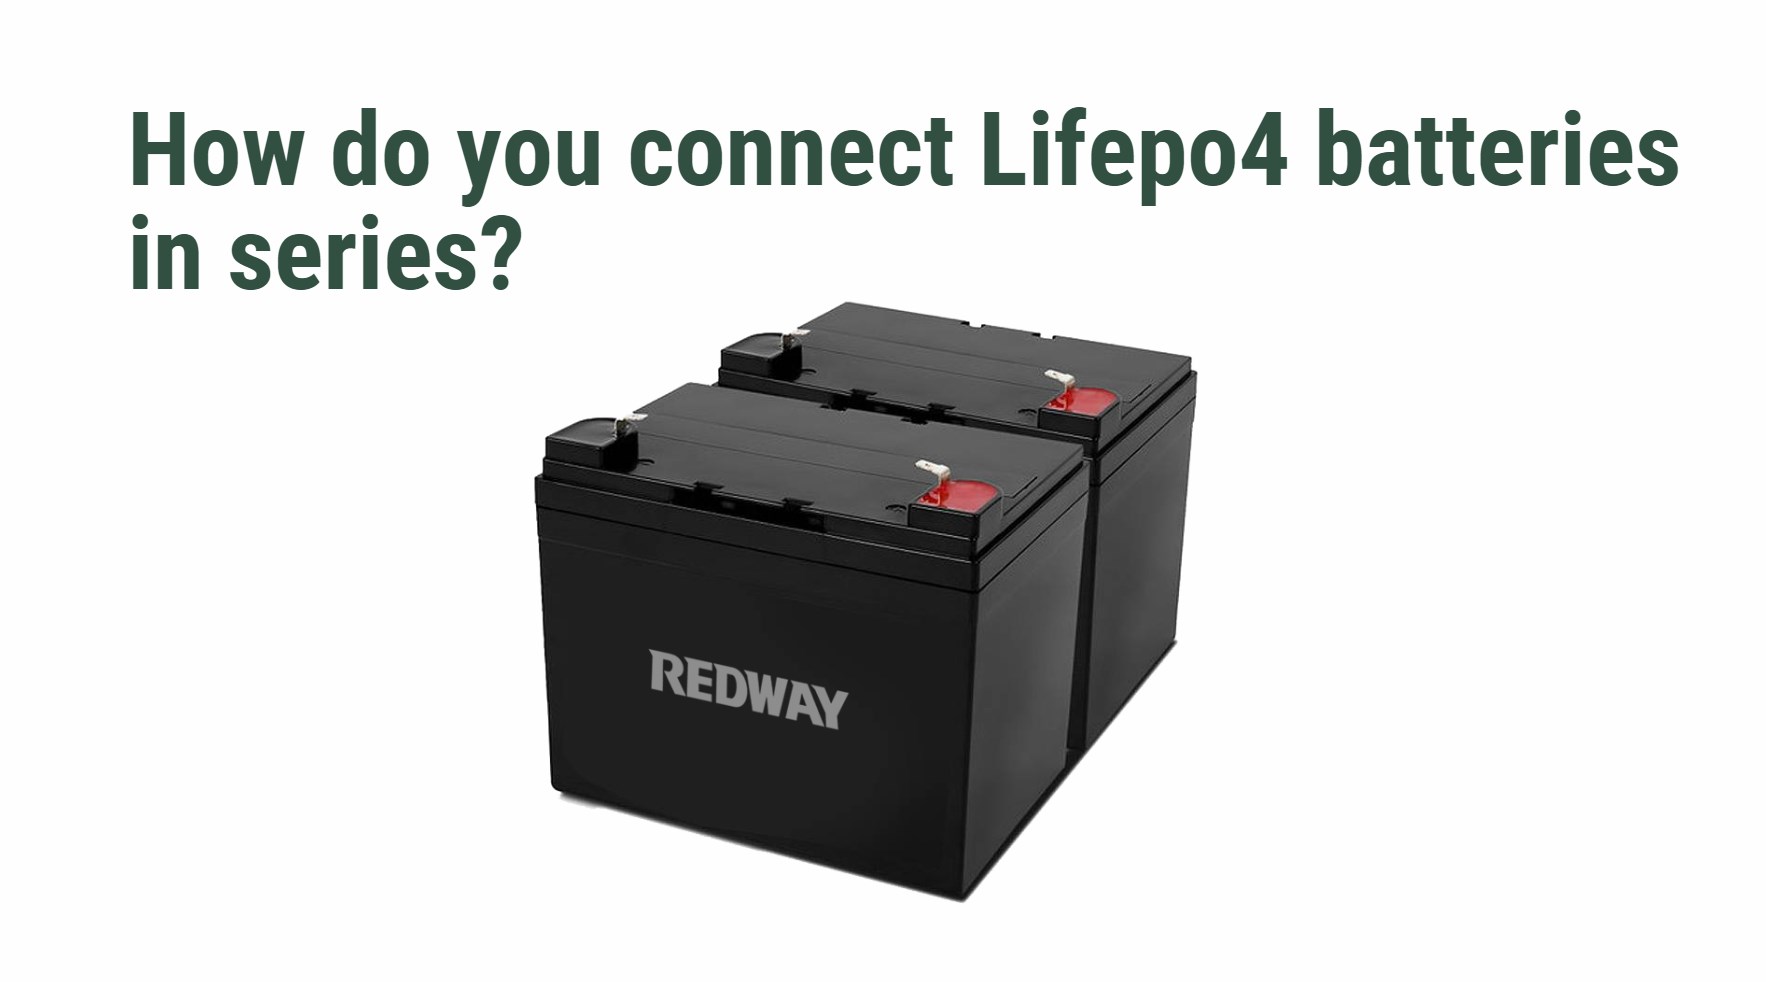 How do you connect Lifepo4 batteries in series?